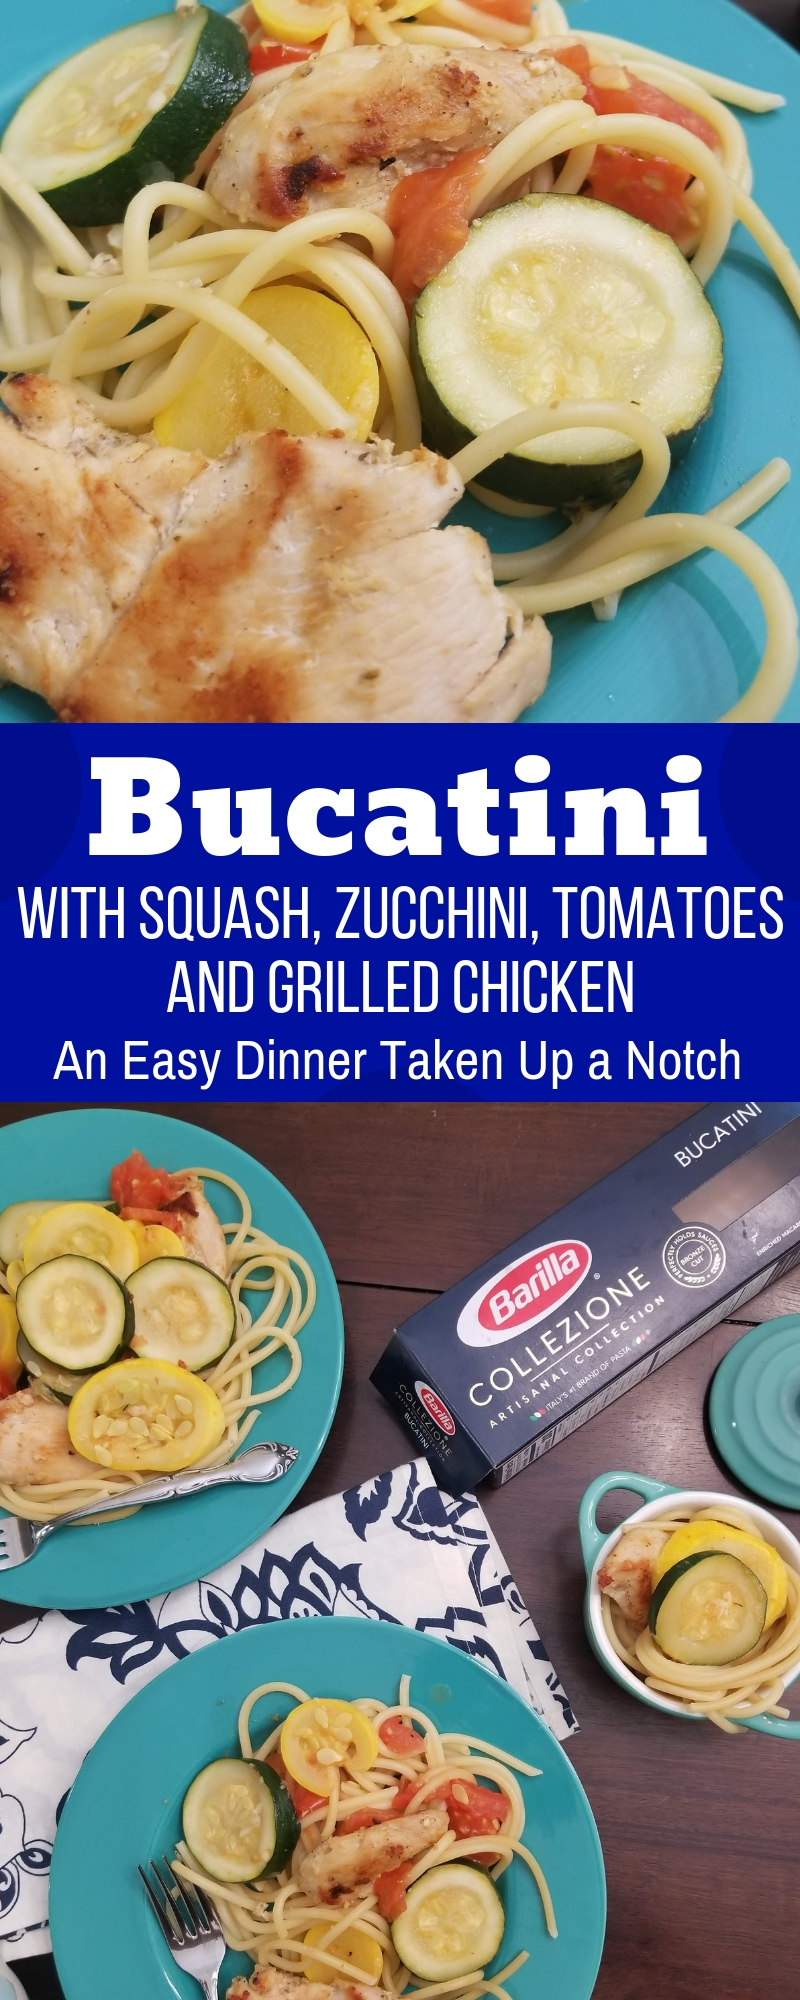 Bucatini Pasta Bucatini Pasta with Squash and Zucchini Recipe This Pasta with Squash and Zucchini recipe is the perfect fall dish filled with farm fresh flavors!  Make this super easy Pasta with Squash and Zucchini Recipe on busy nights!